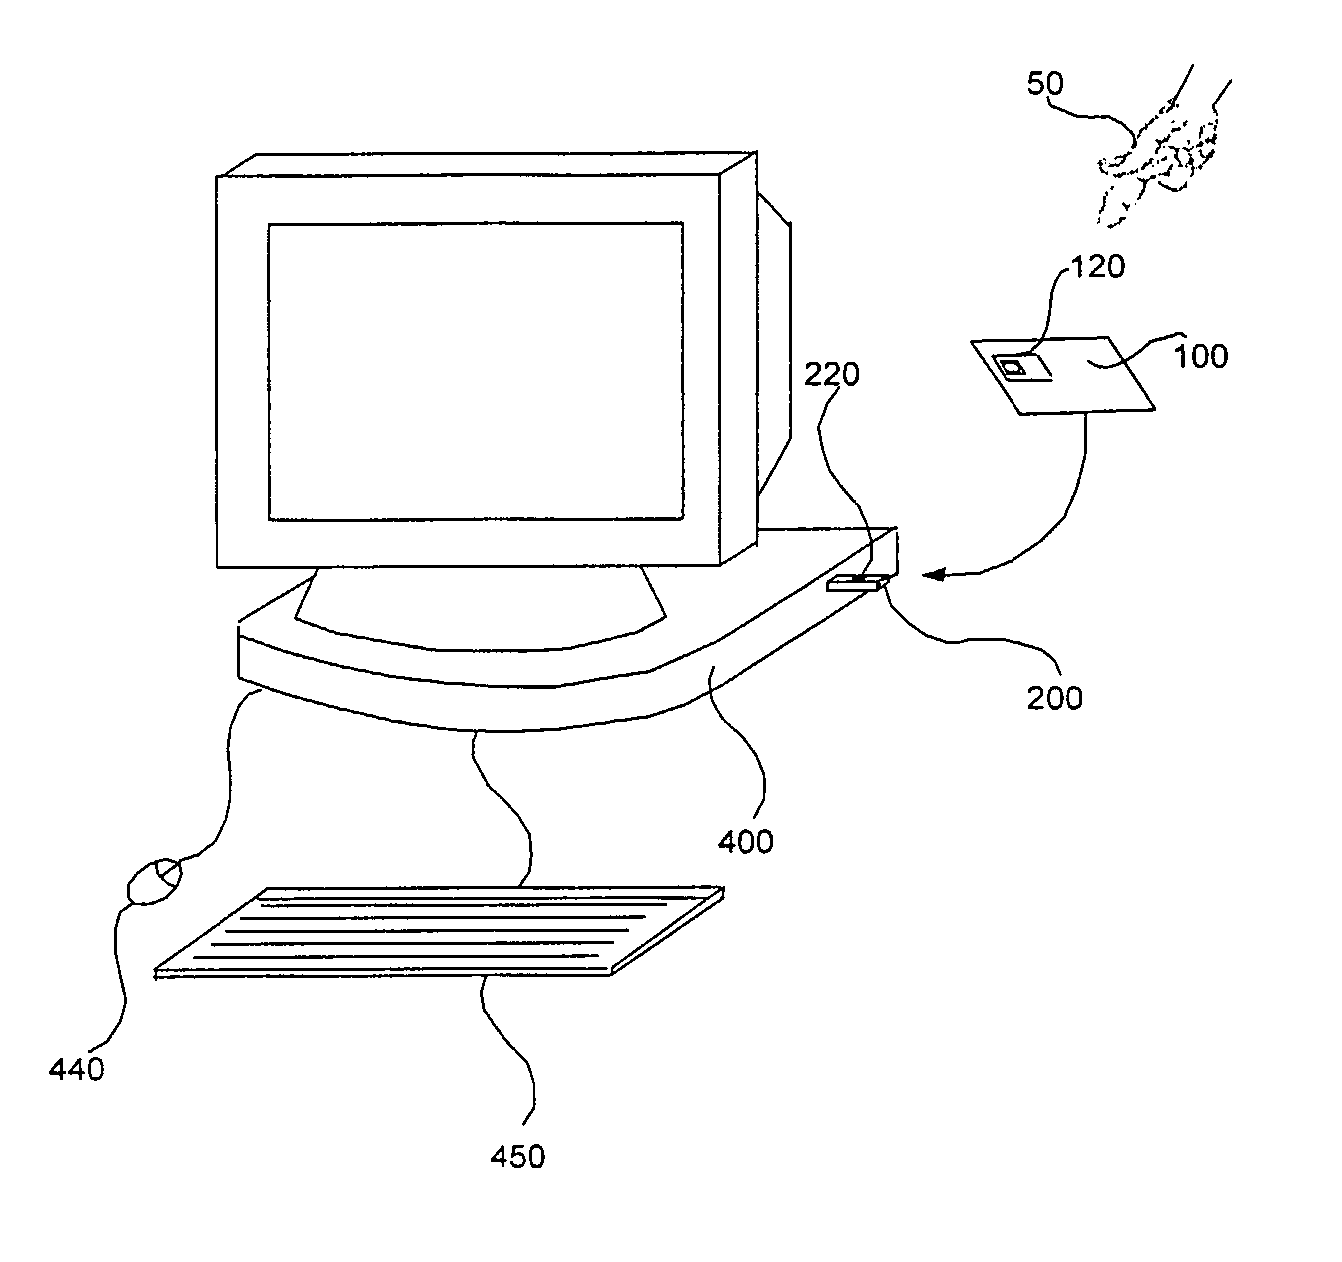 Multi-Factor Security System With Portable Devices And Security Kernels